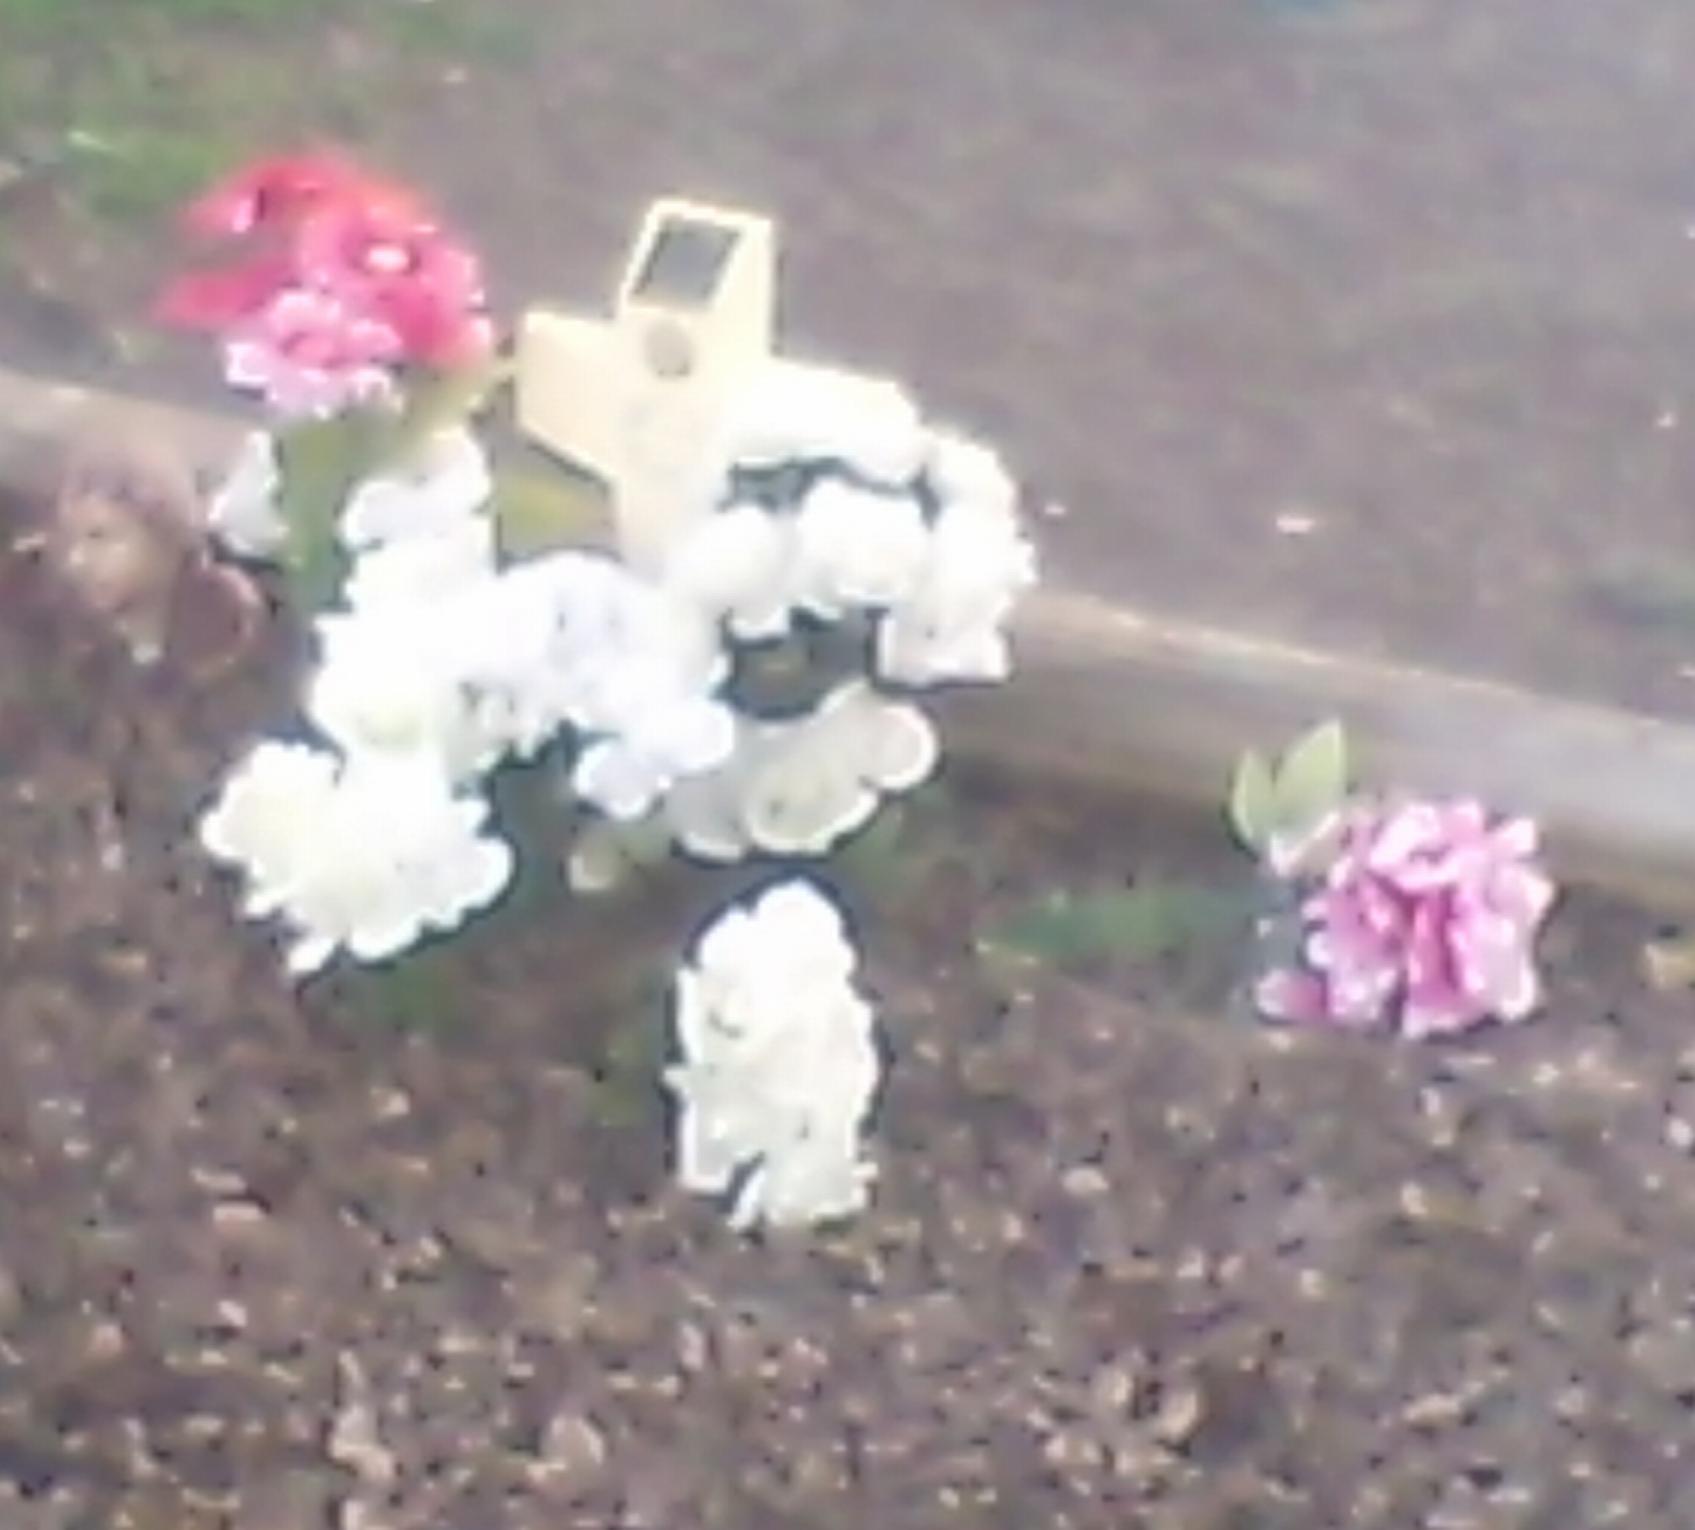 A White Cross and Plastic Flowers left by someone on the property.